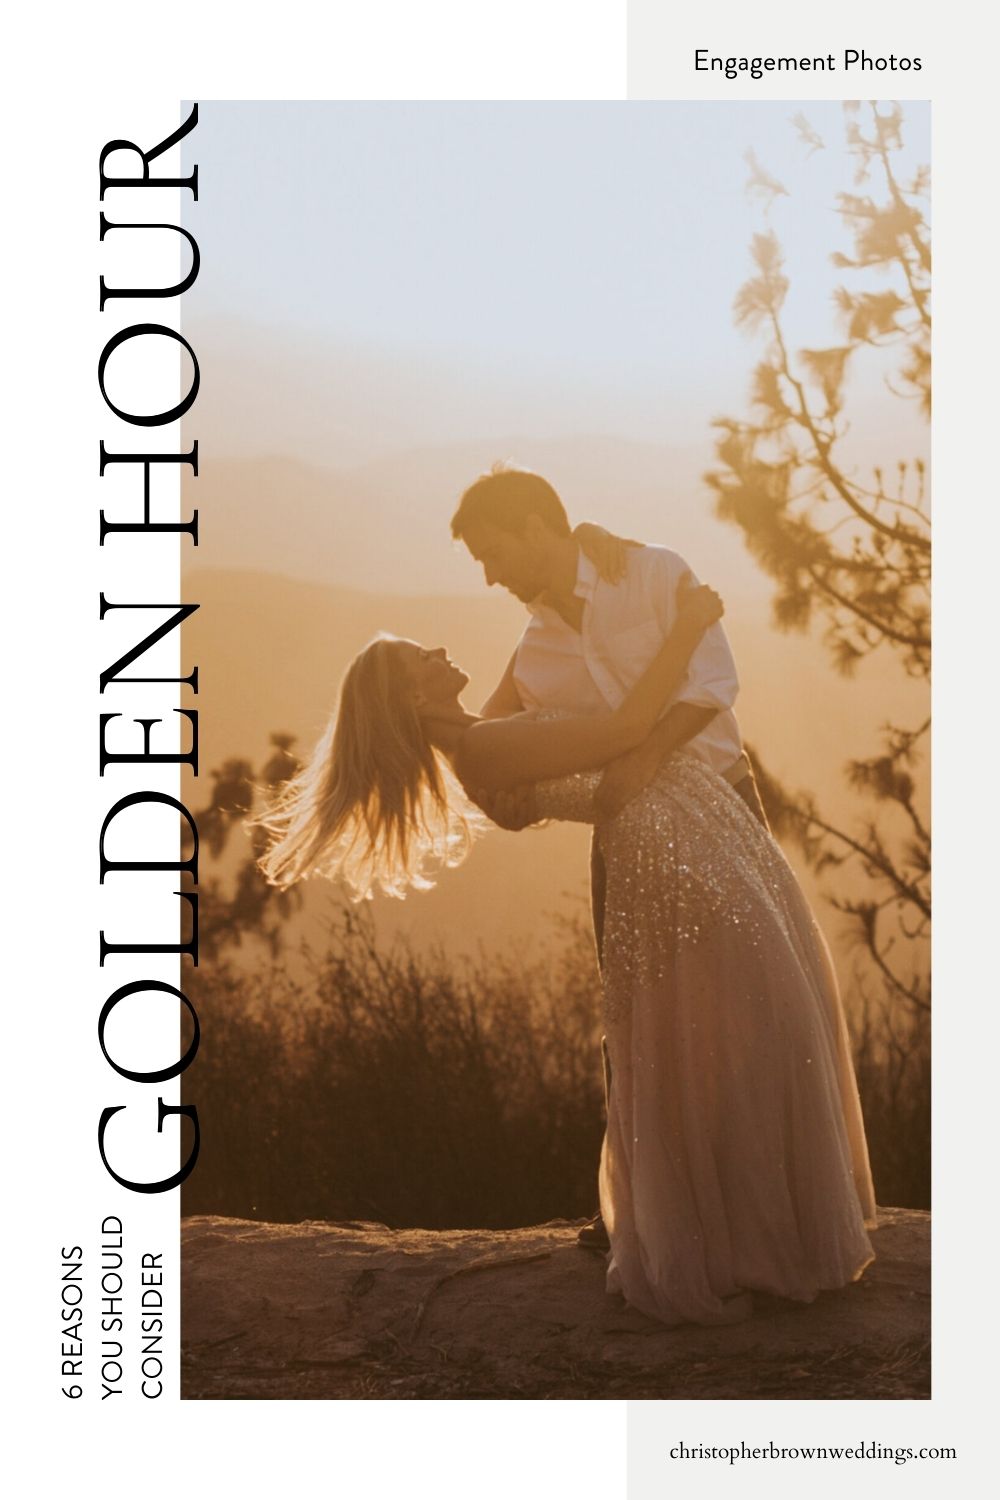 Couple sharing a dance during their golden hour engagement shoot; image overlaid with text that reads 6 Reasons You Should Consider Golden Hour Engagement Photos